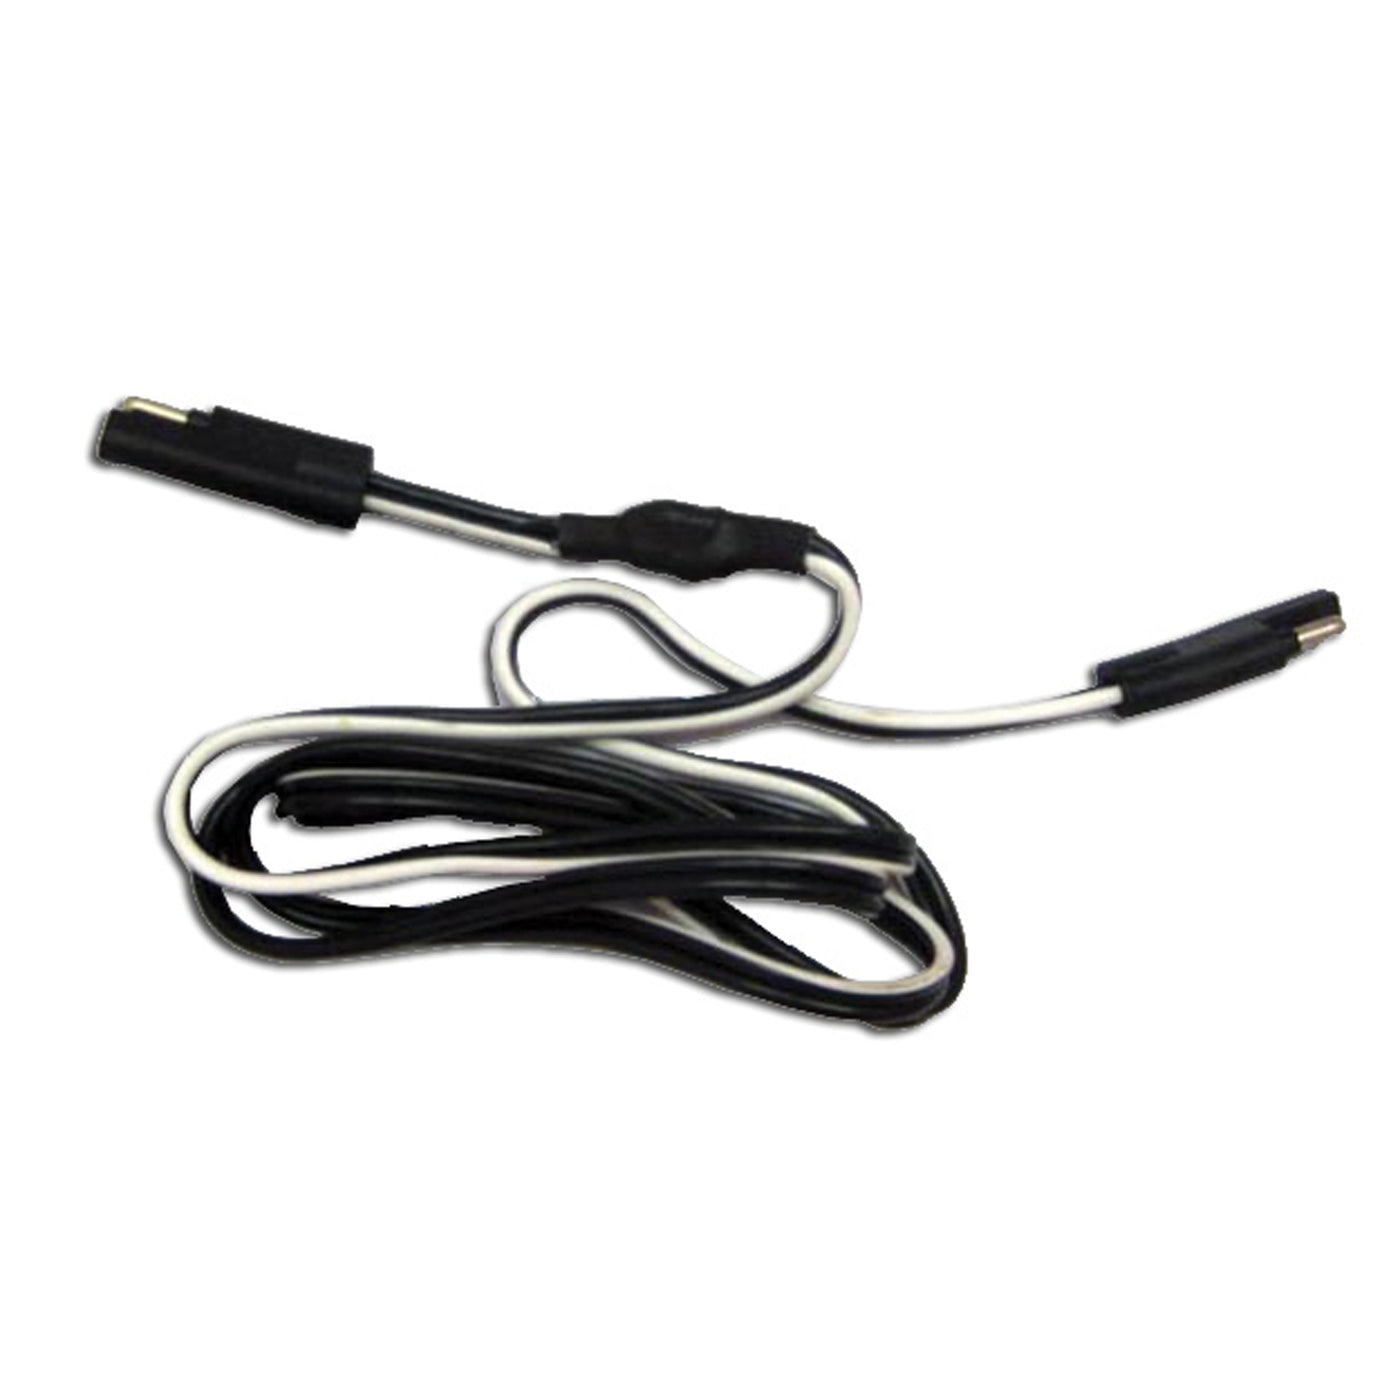 Hardwire Extension Cord